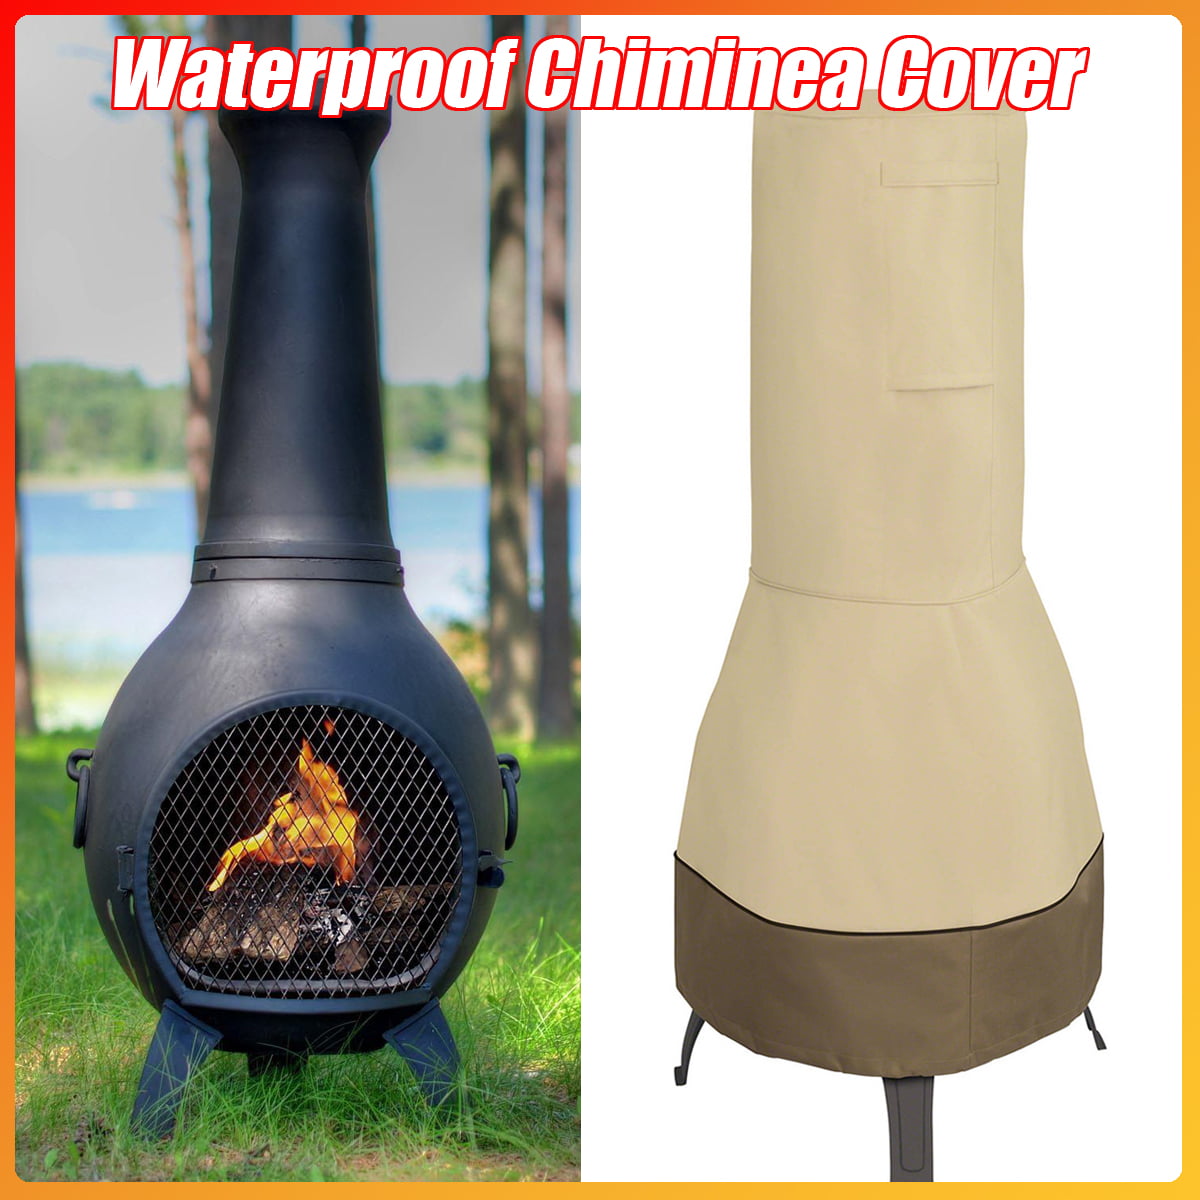 Outdoor Chimney Cover Chimenea Protector for Patio Heater Fire BBQ Waterproof 